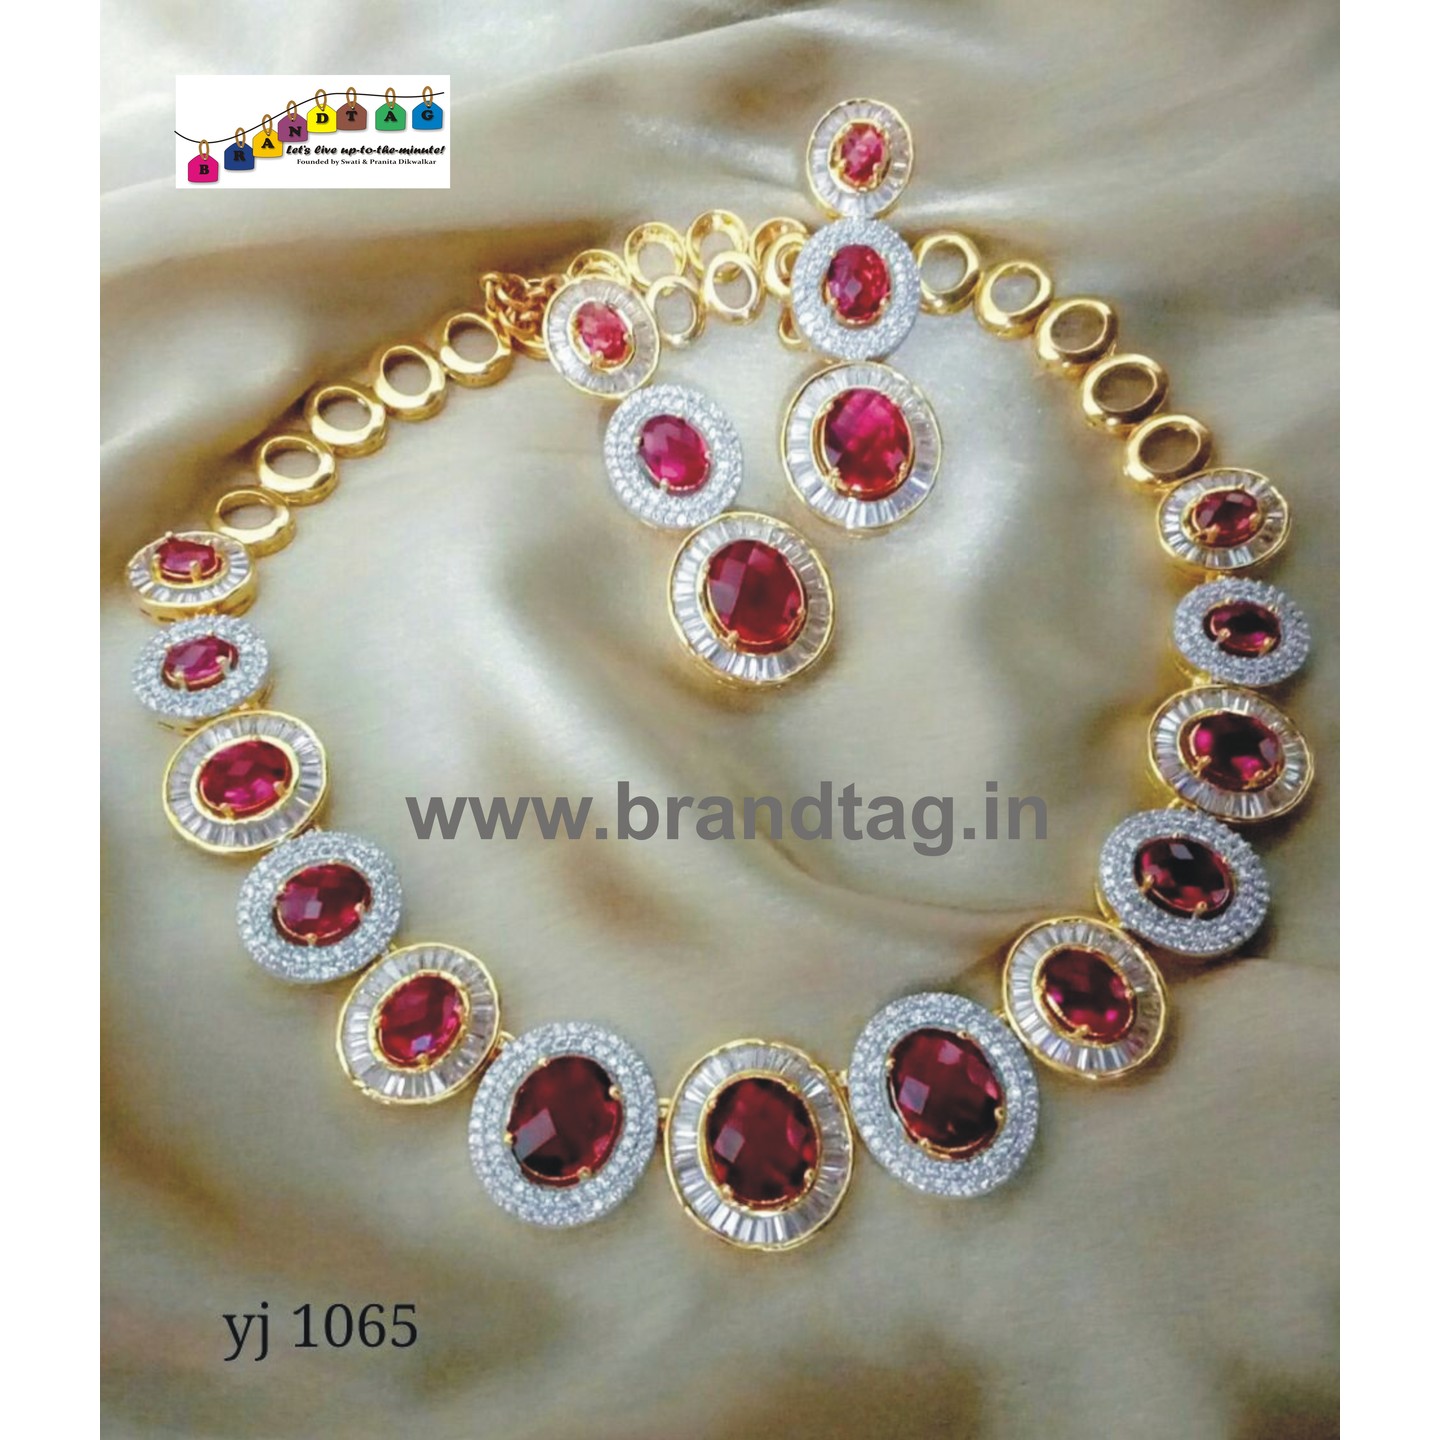 Special Navratri Collection...Contemporary Golden Diamond and Stones Necklace Set!! 